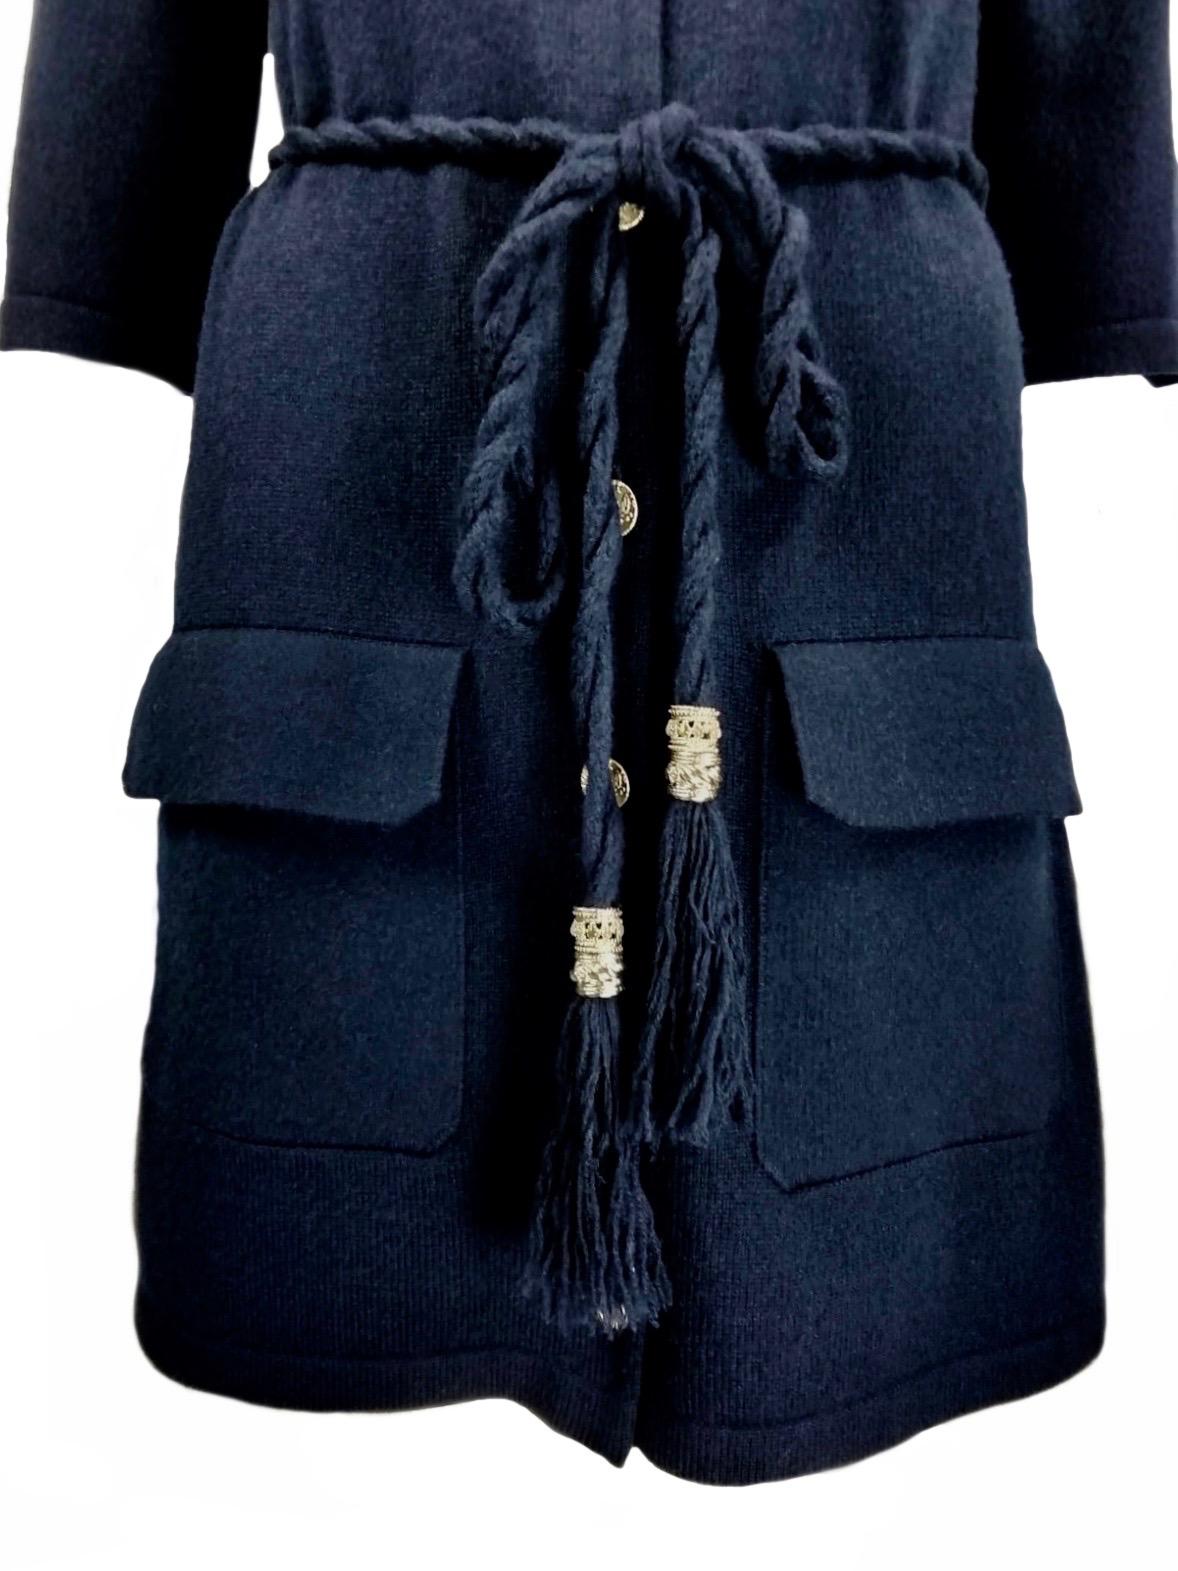 Chanel navy cashmere dress FR 36  18C In Excellent Condition For Sale In Rubiera, RE